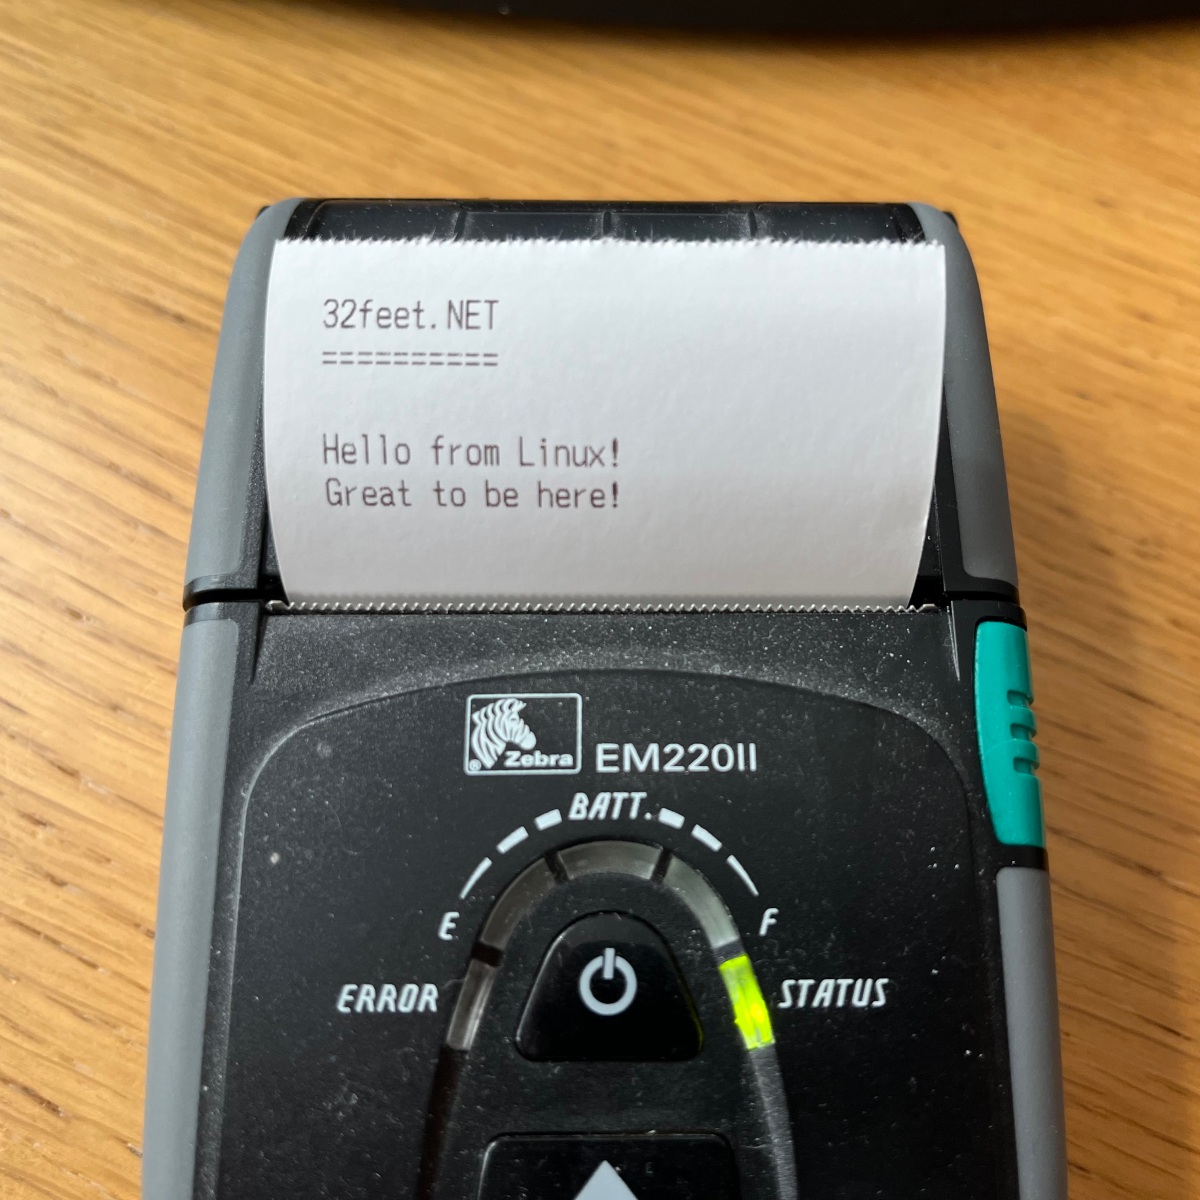 Zebra Bluetooth thermal printer showing the output of a test application running on a Raspberry Pi. Message reads "32feet.NET Hello from Linux! Great to be here!"